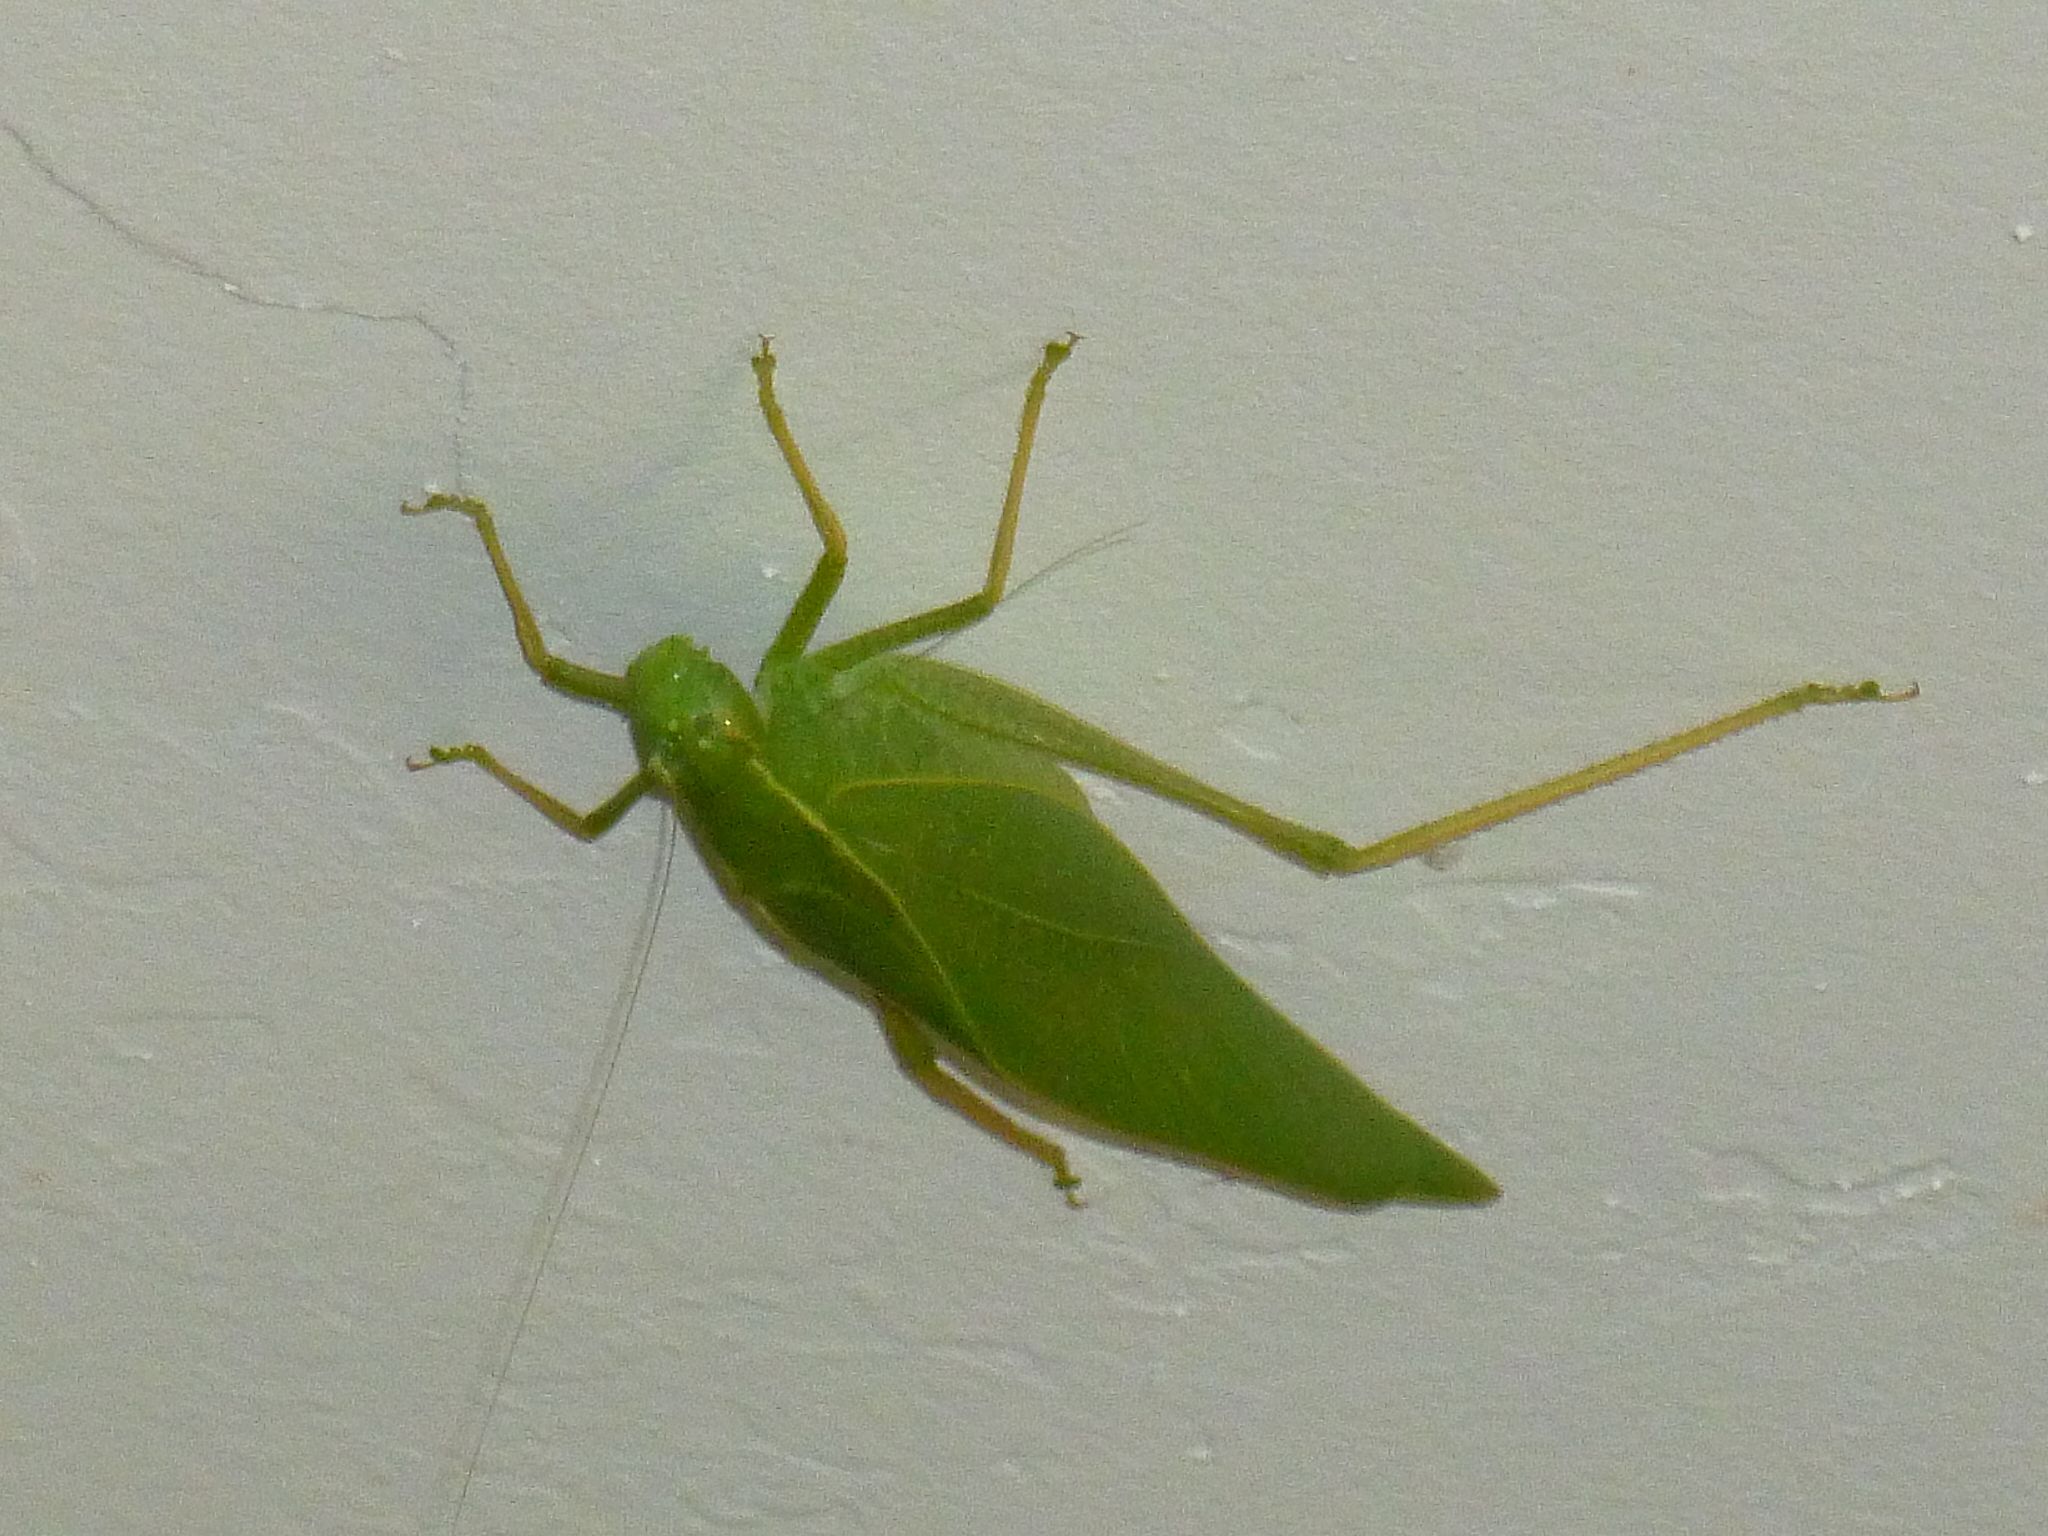 Green insect photo